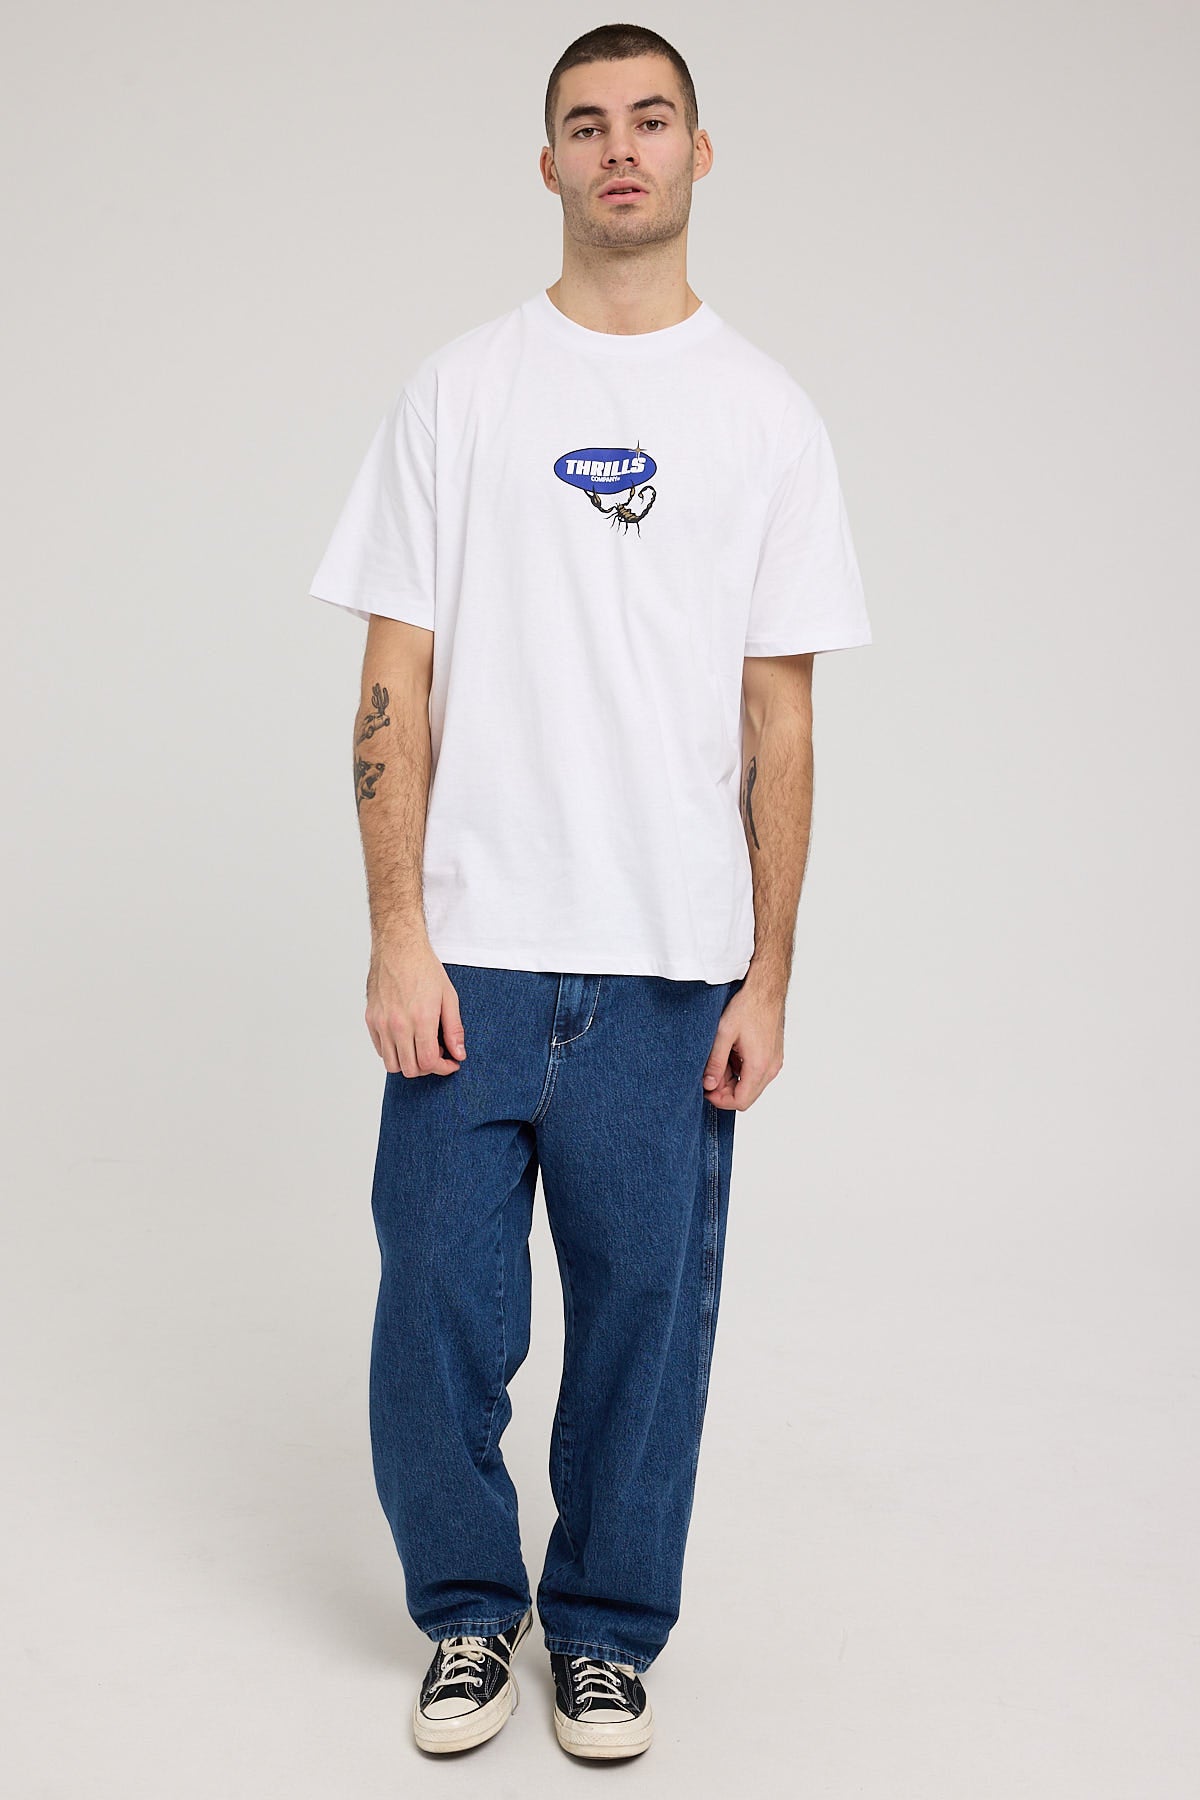 Thrills Lifted Merch Fit Tee White